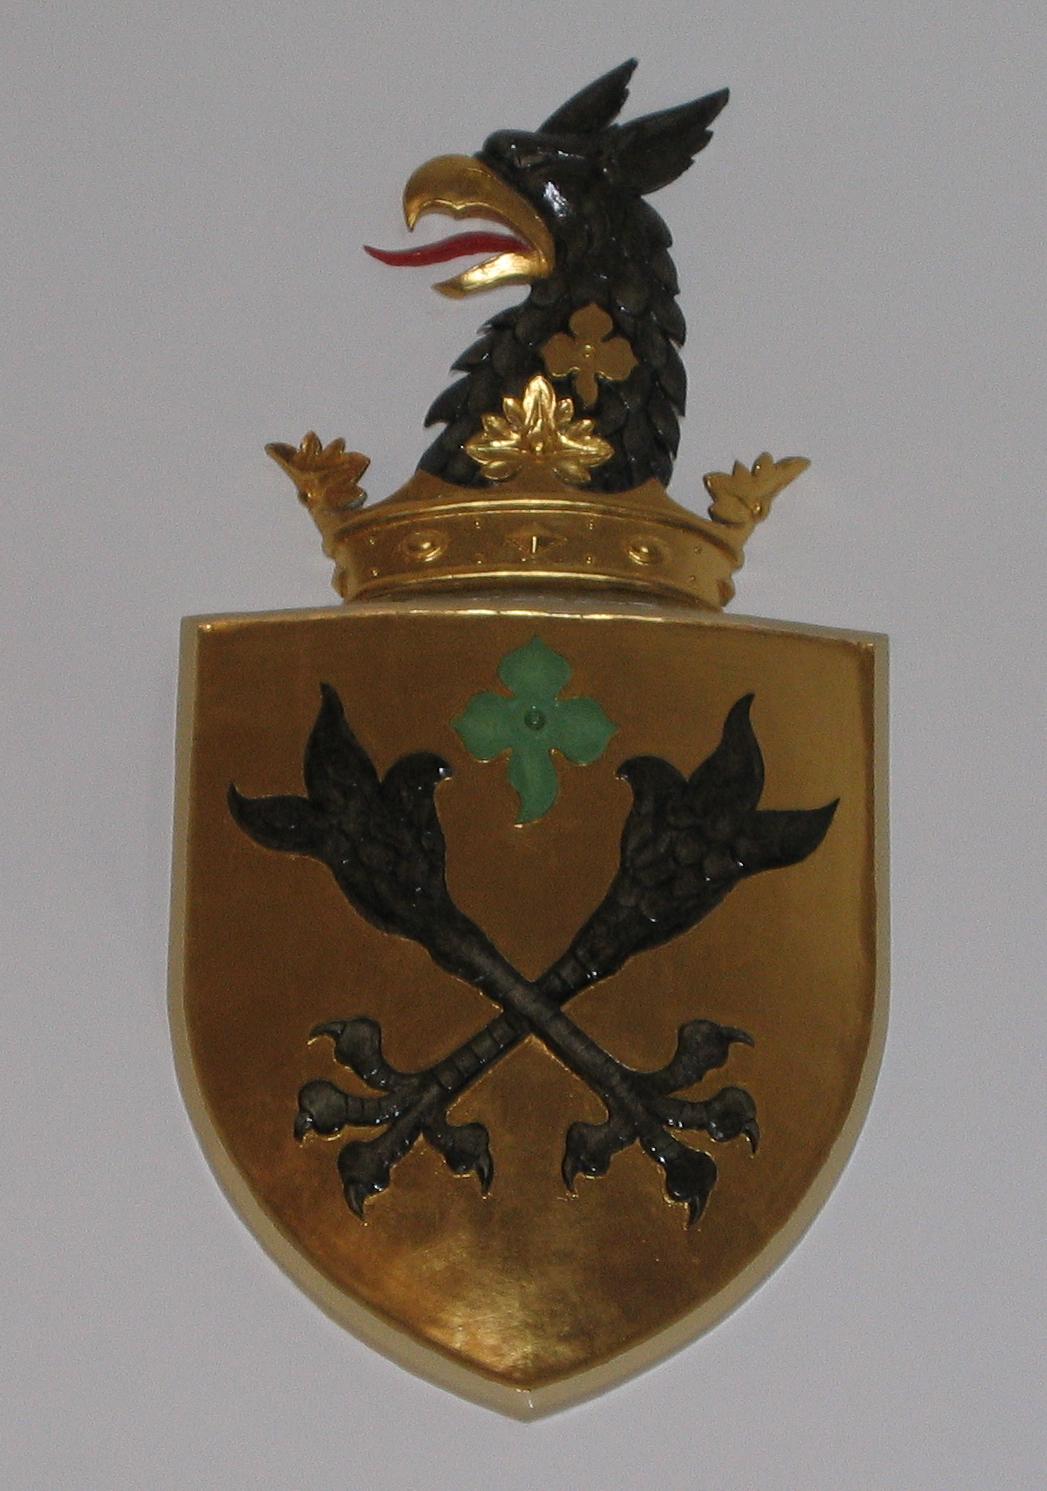 The Crest which is on display at Brewers' Hall, London